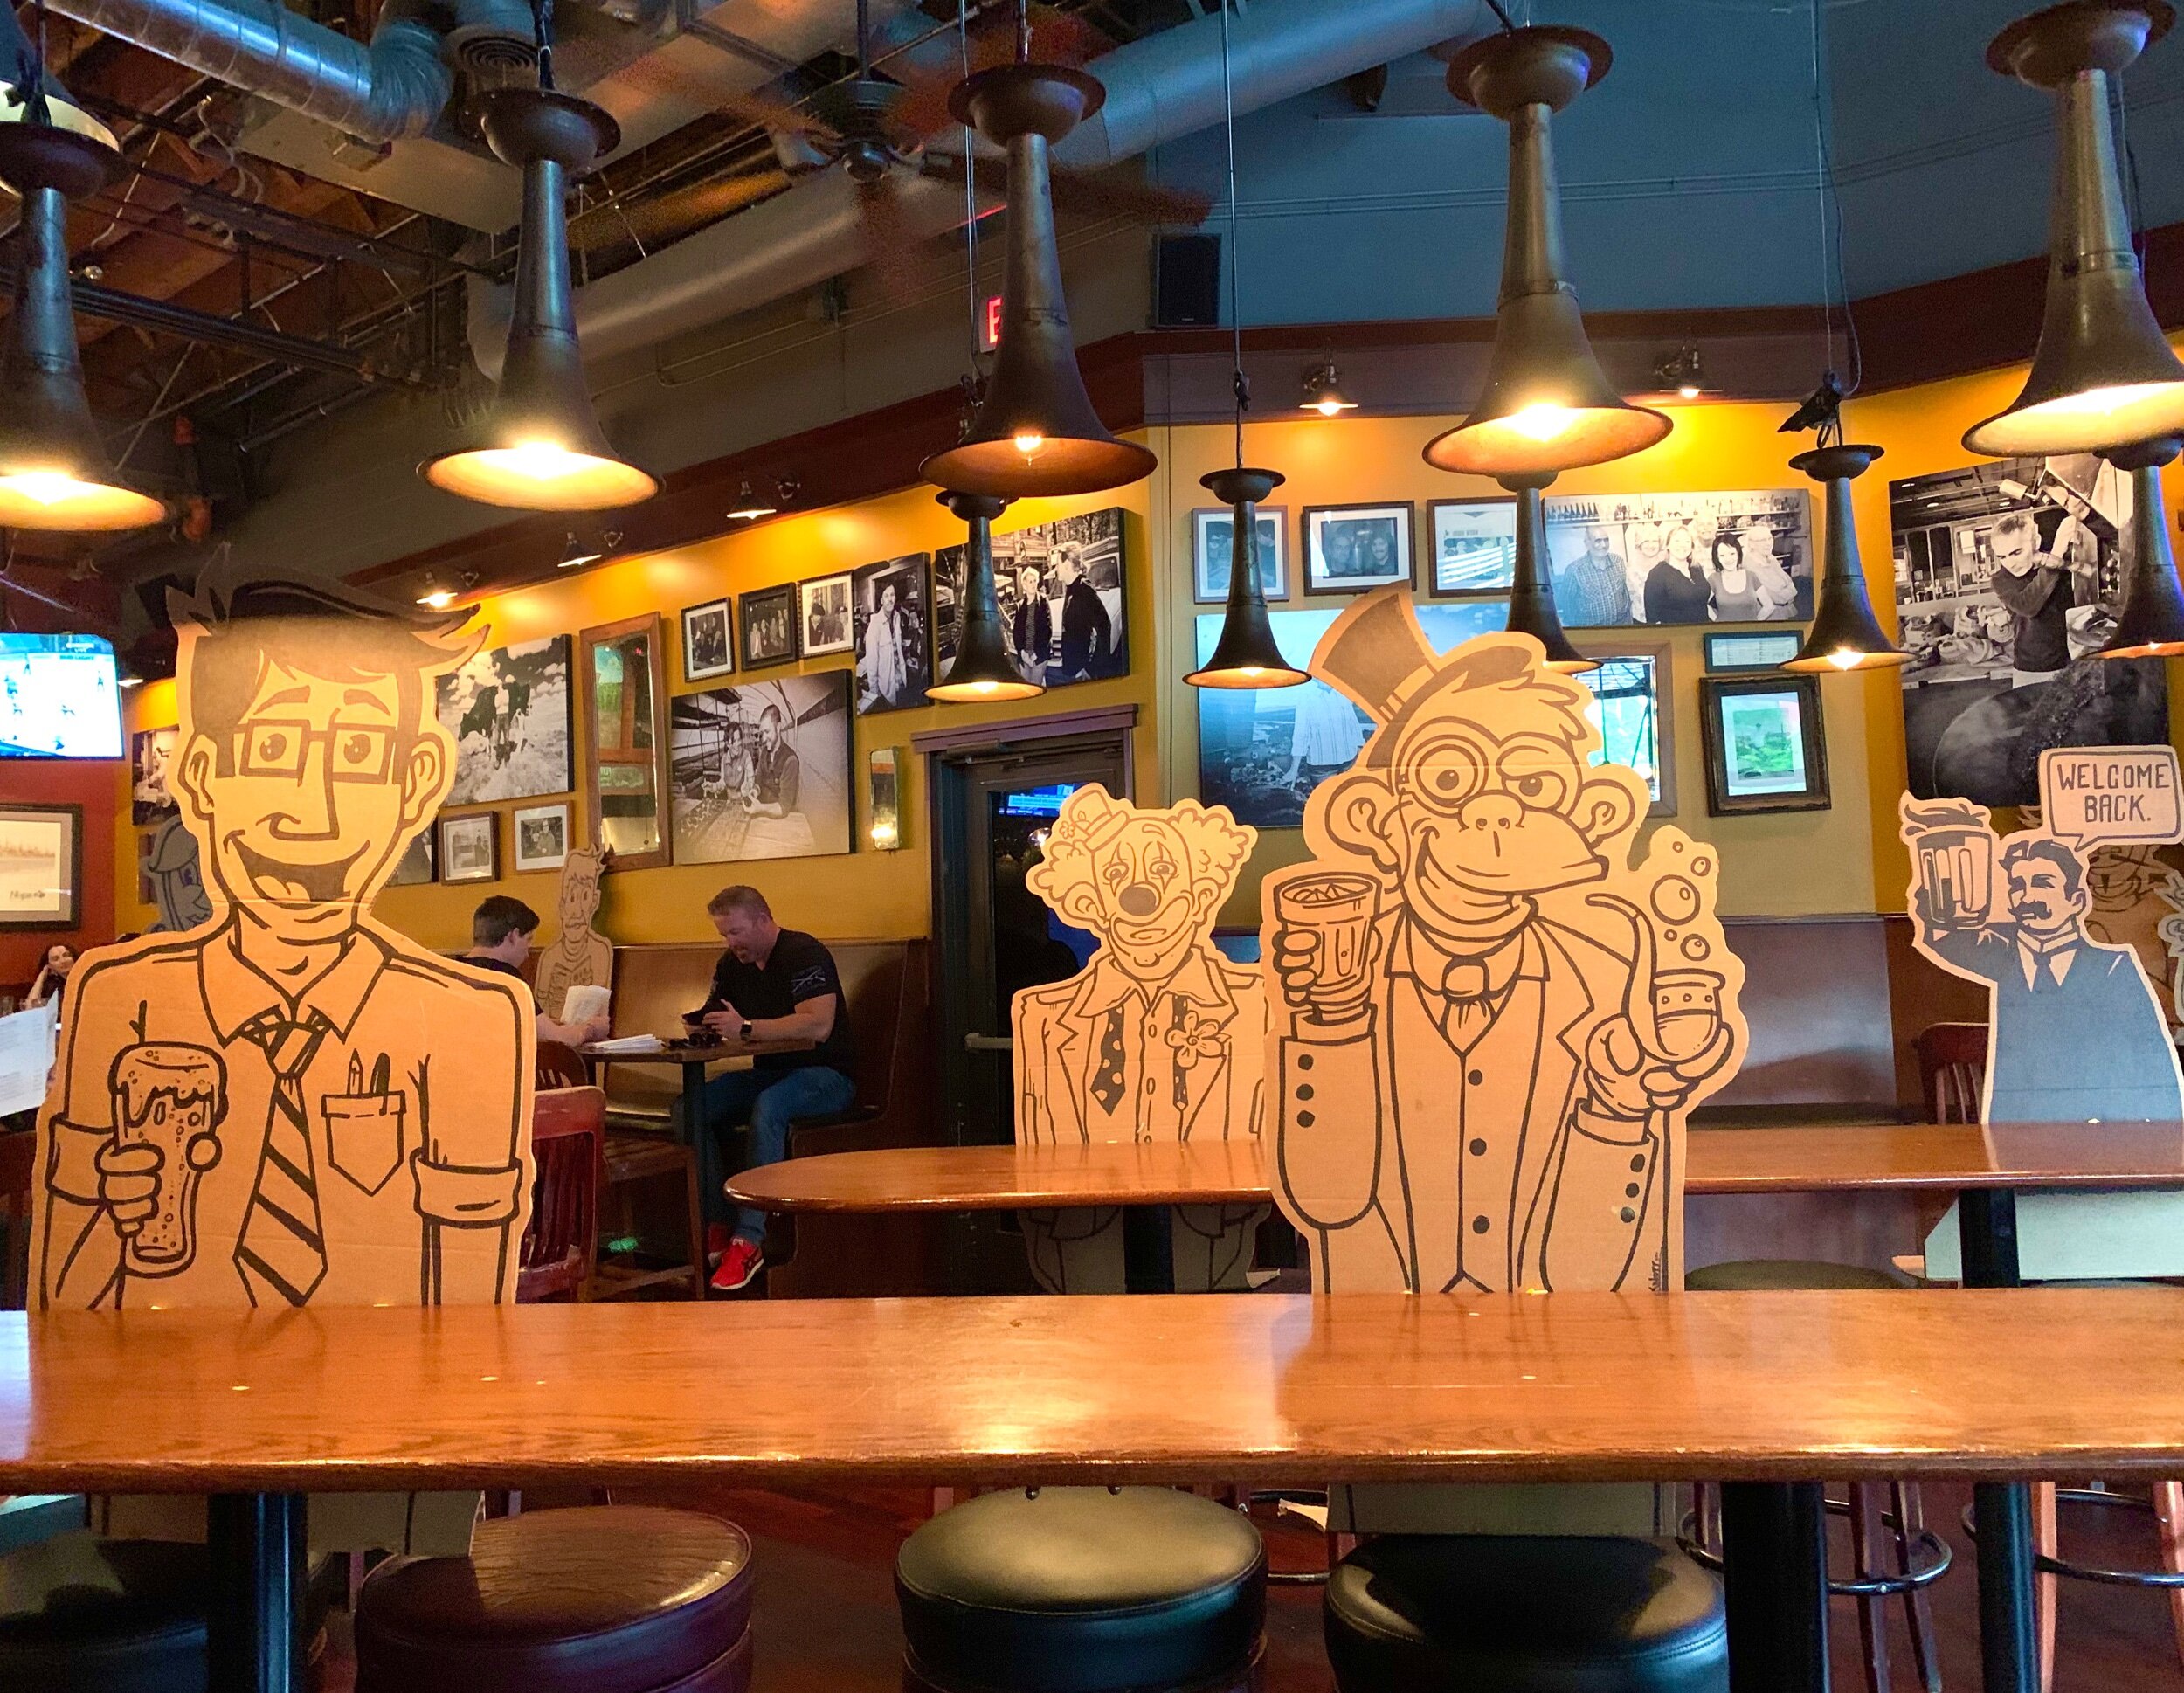   Bitter Creek Ale House  in Boise came up with a fun and creative way to keep people properly distanced. These "Temporary Diners" were scattered throughout their restaurant and seated in all the areas where customers could not sit. 